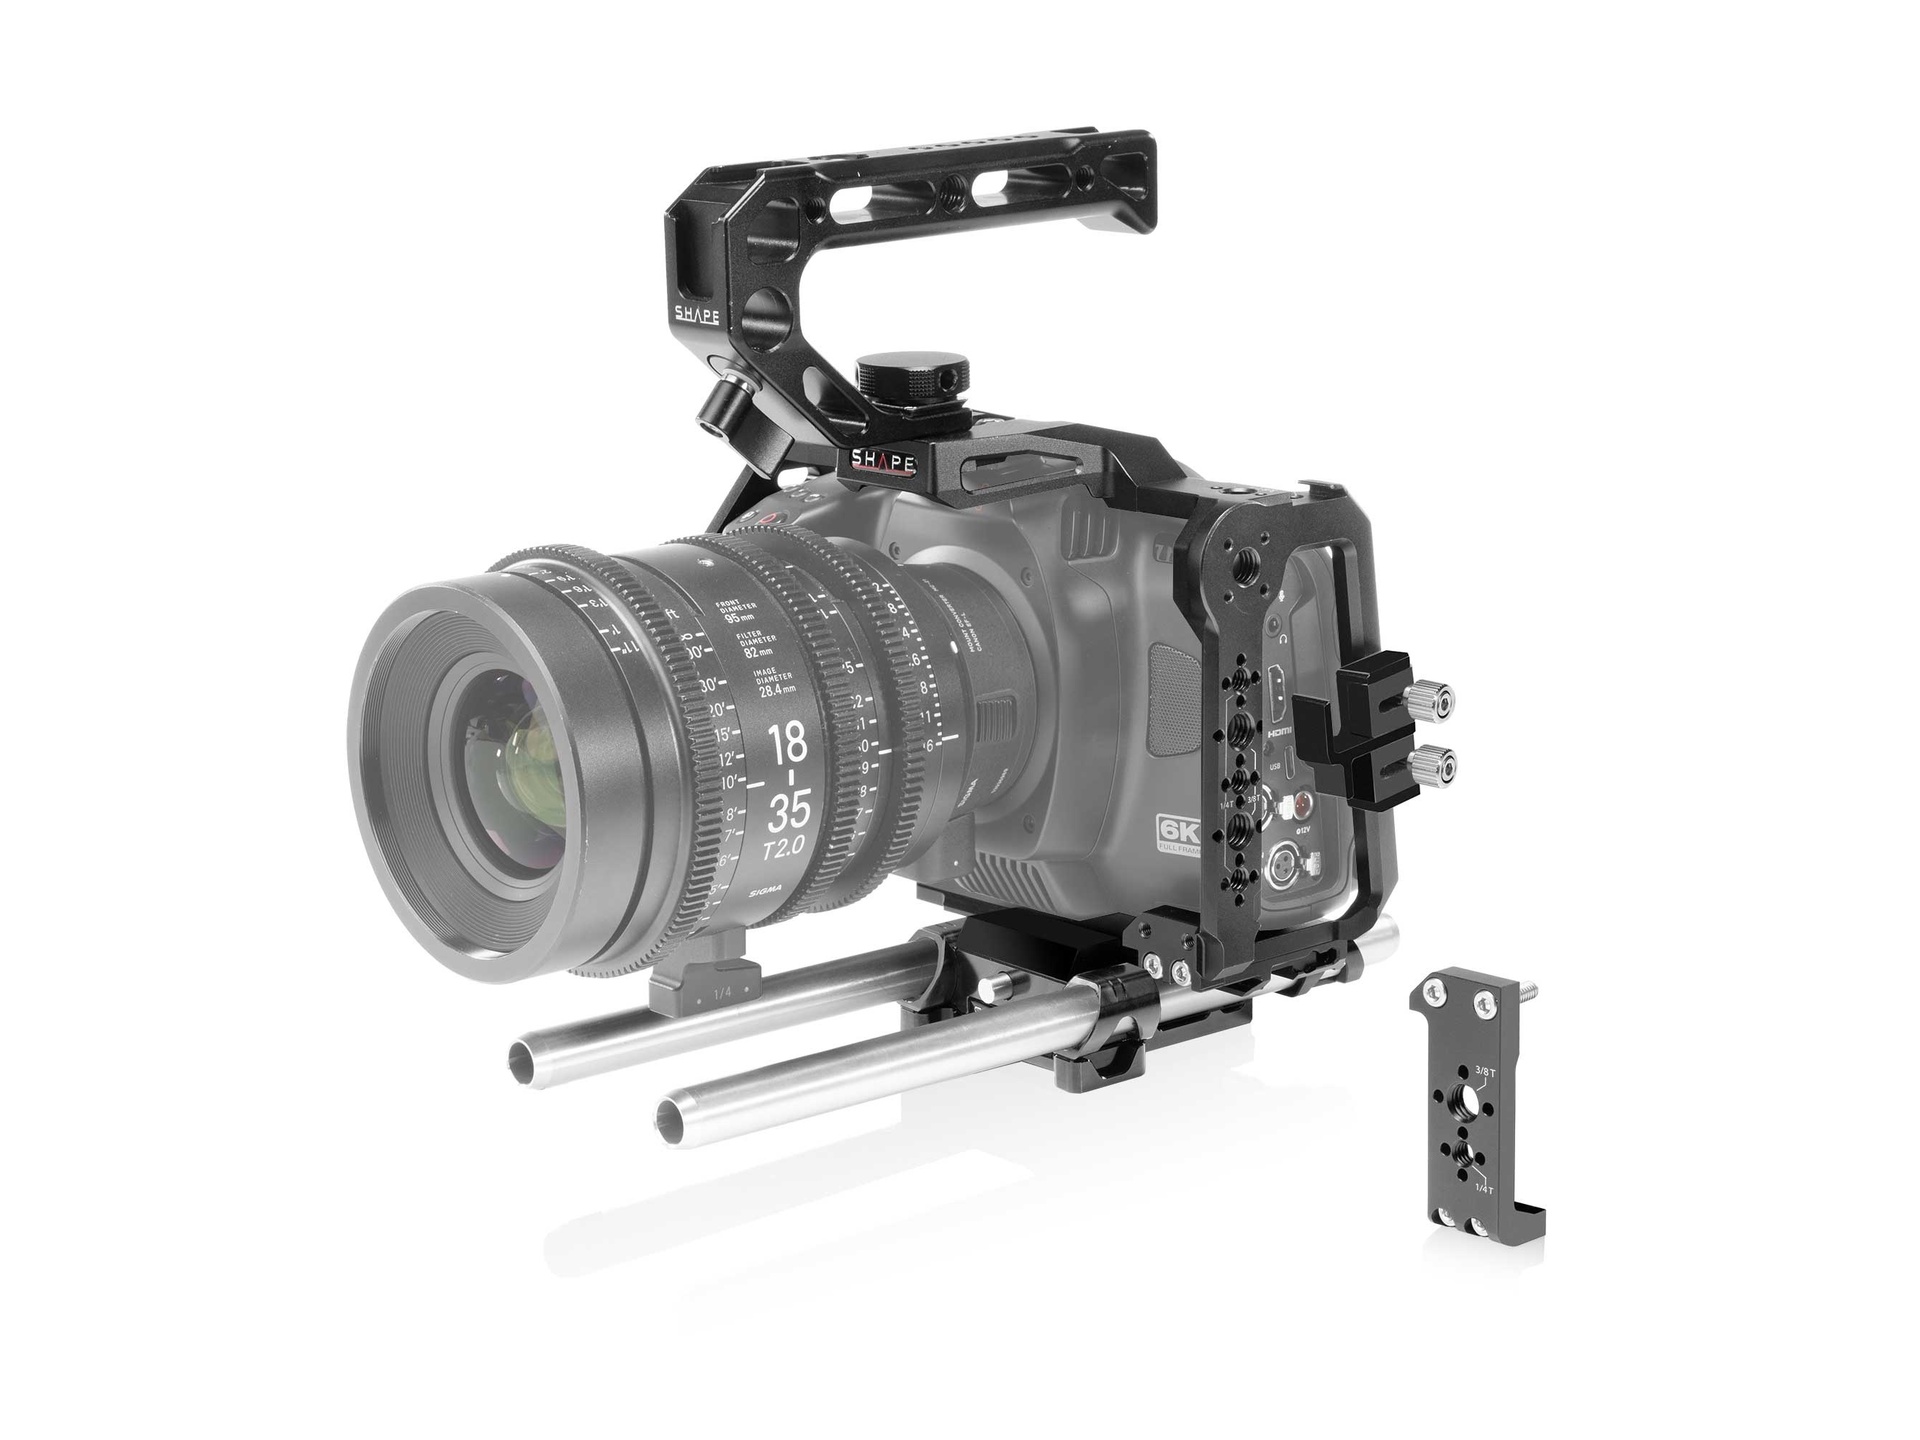 SHAPE Cage for Blackmagic Cinema Camera 6K/6K Pro/6K G2 with Top Handle & 15mm LWS Rod System